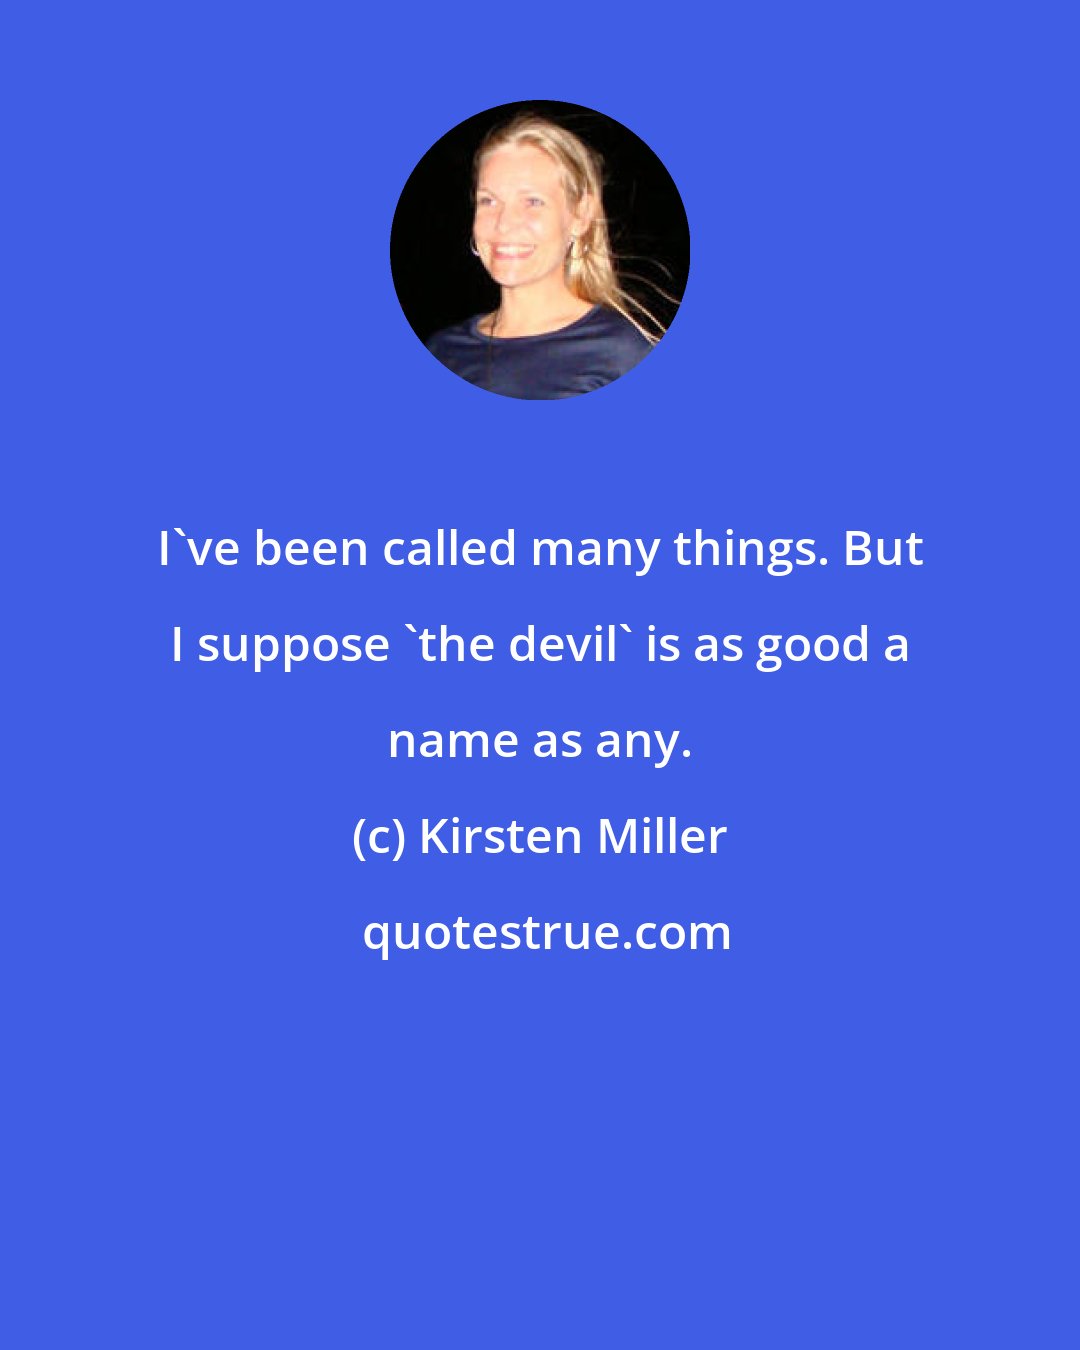 Kirsten Miller: I've been called many things. But I suppose 'the devil' is as good a name as any.